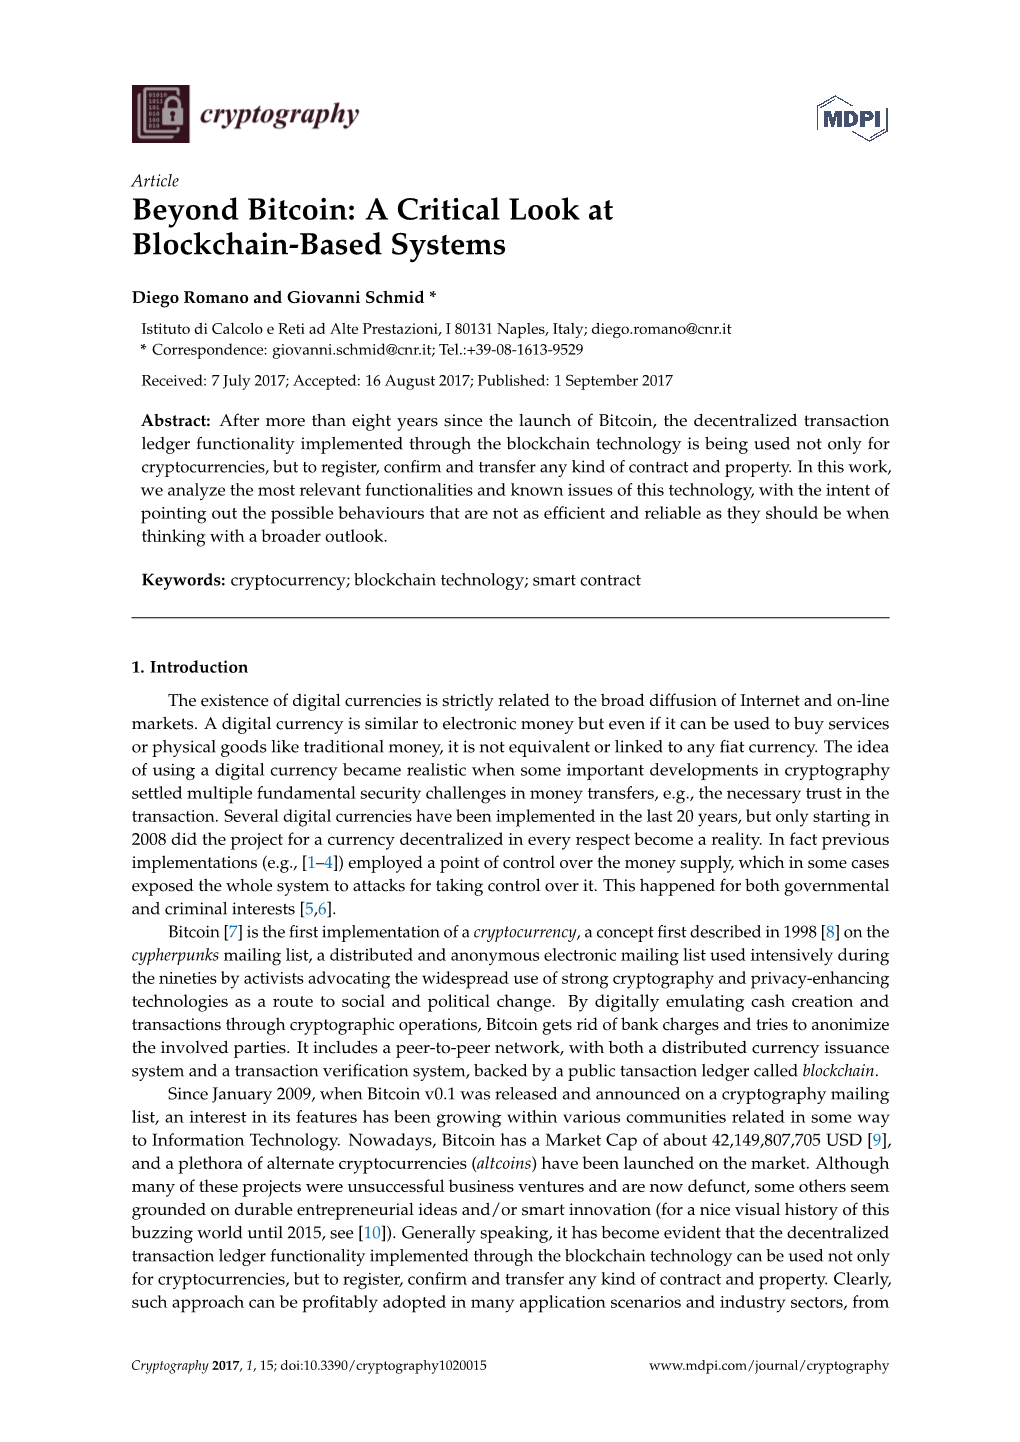 Beyond Bitcoin: a Critical Look at Blockchain-Based Systems